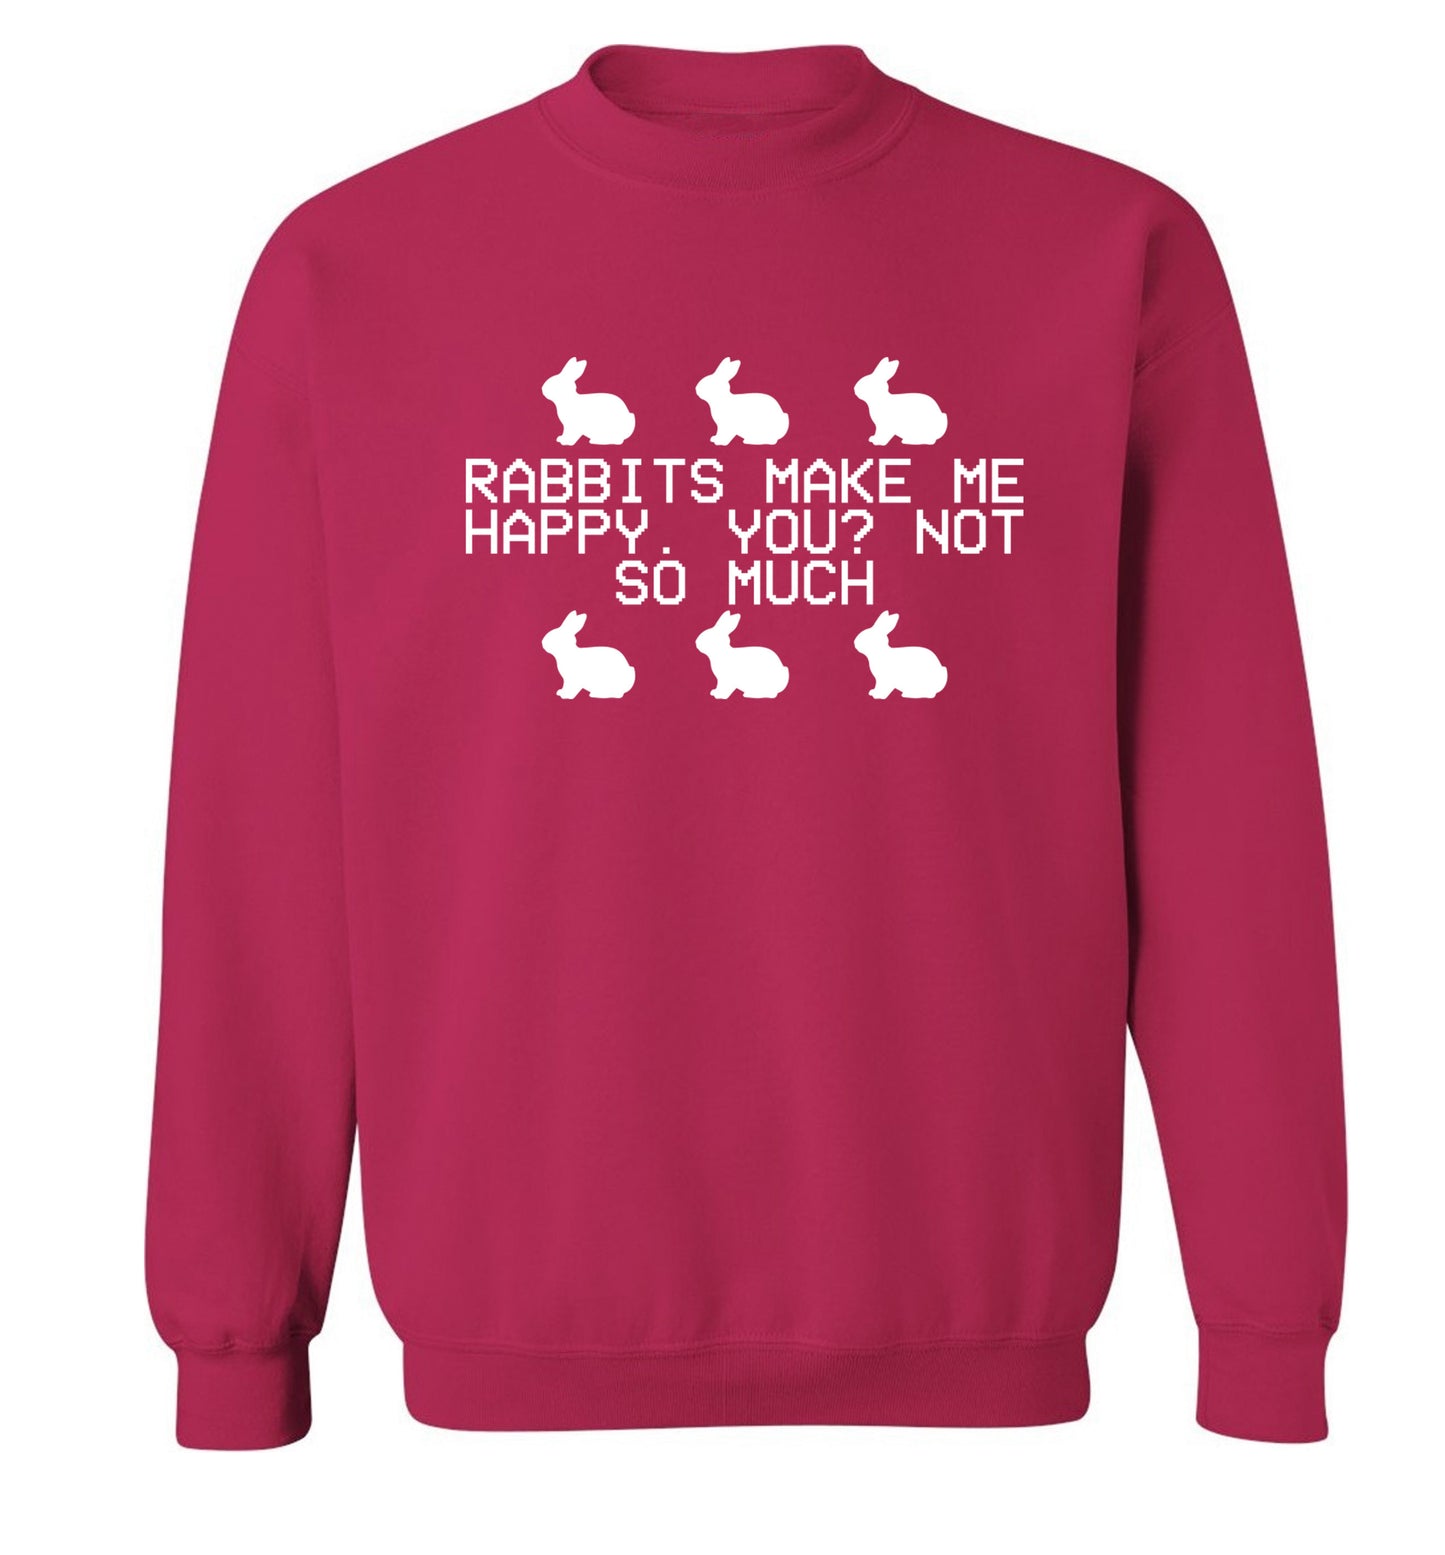 Rabbits make me happy, you not so much Adult's unisex pink  sweater XL